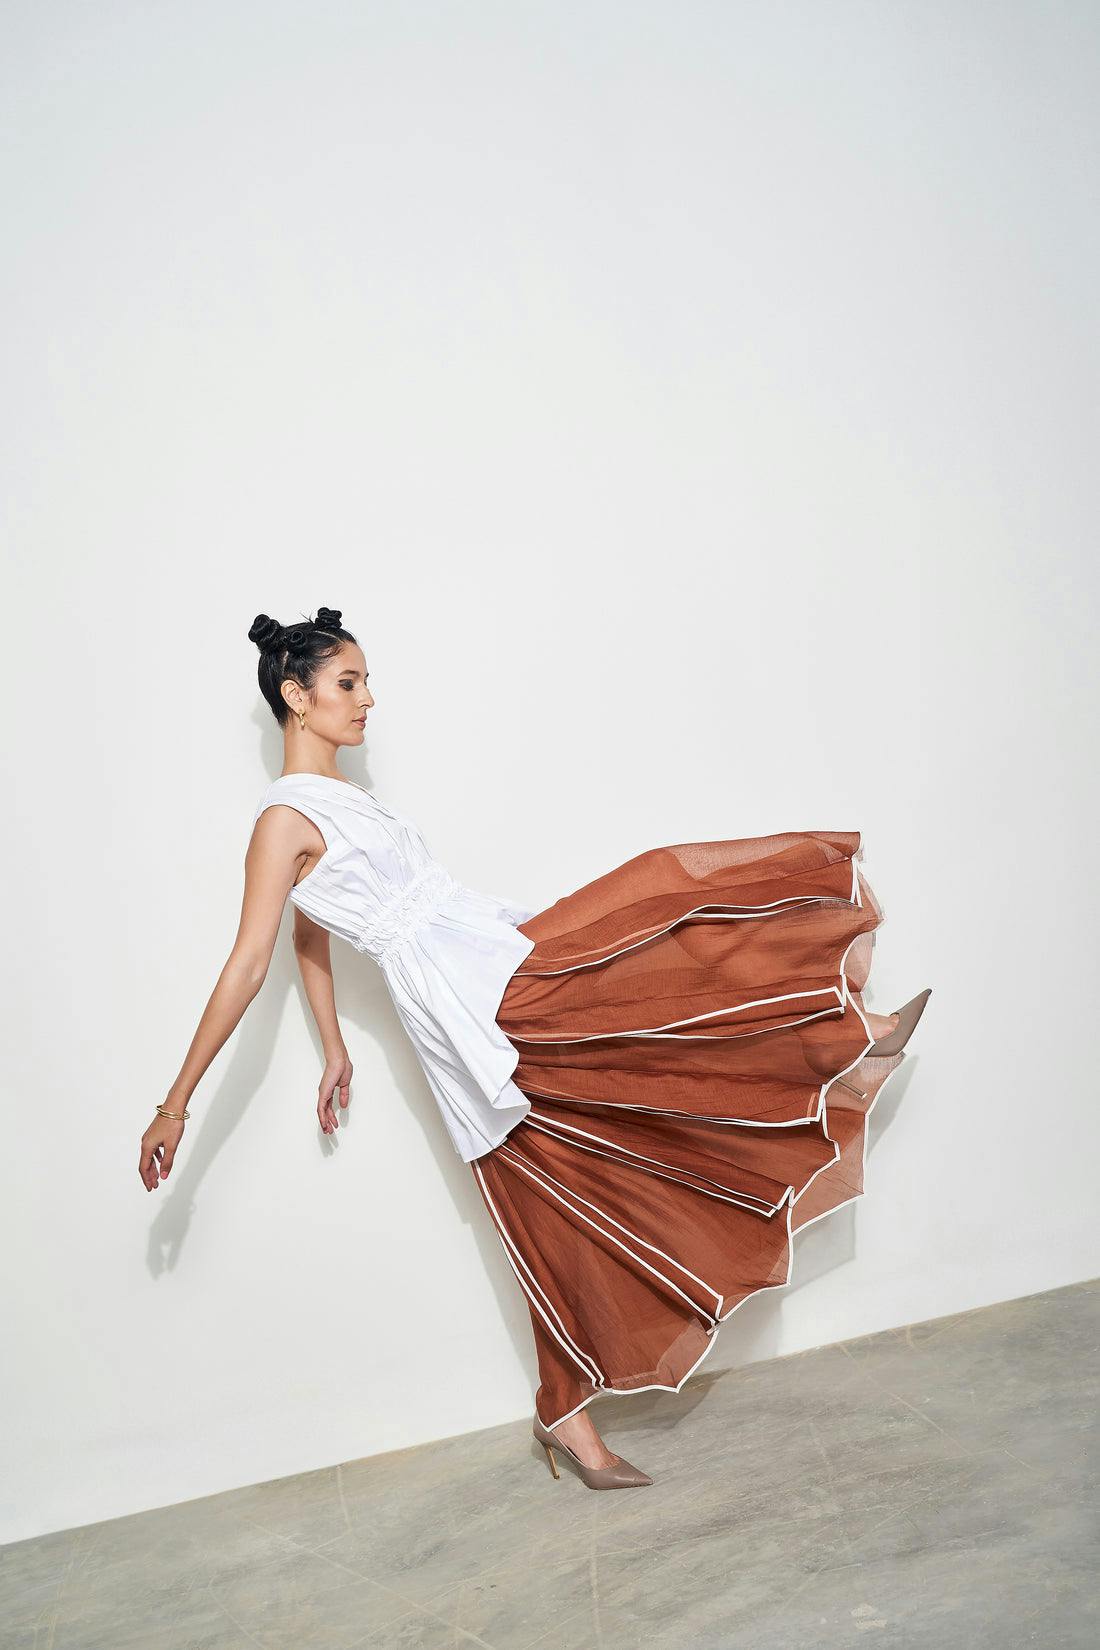 Primary image of Panelled Skirt, a product by Corpora Studio